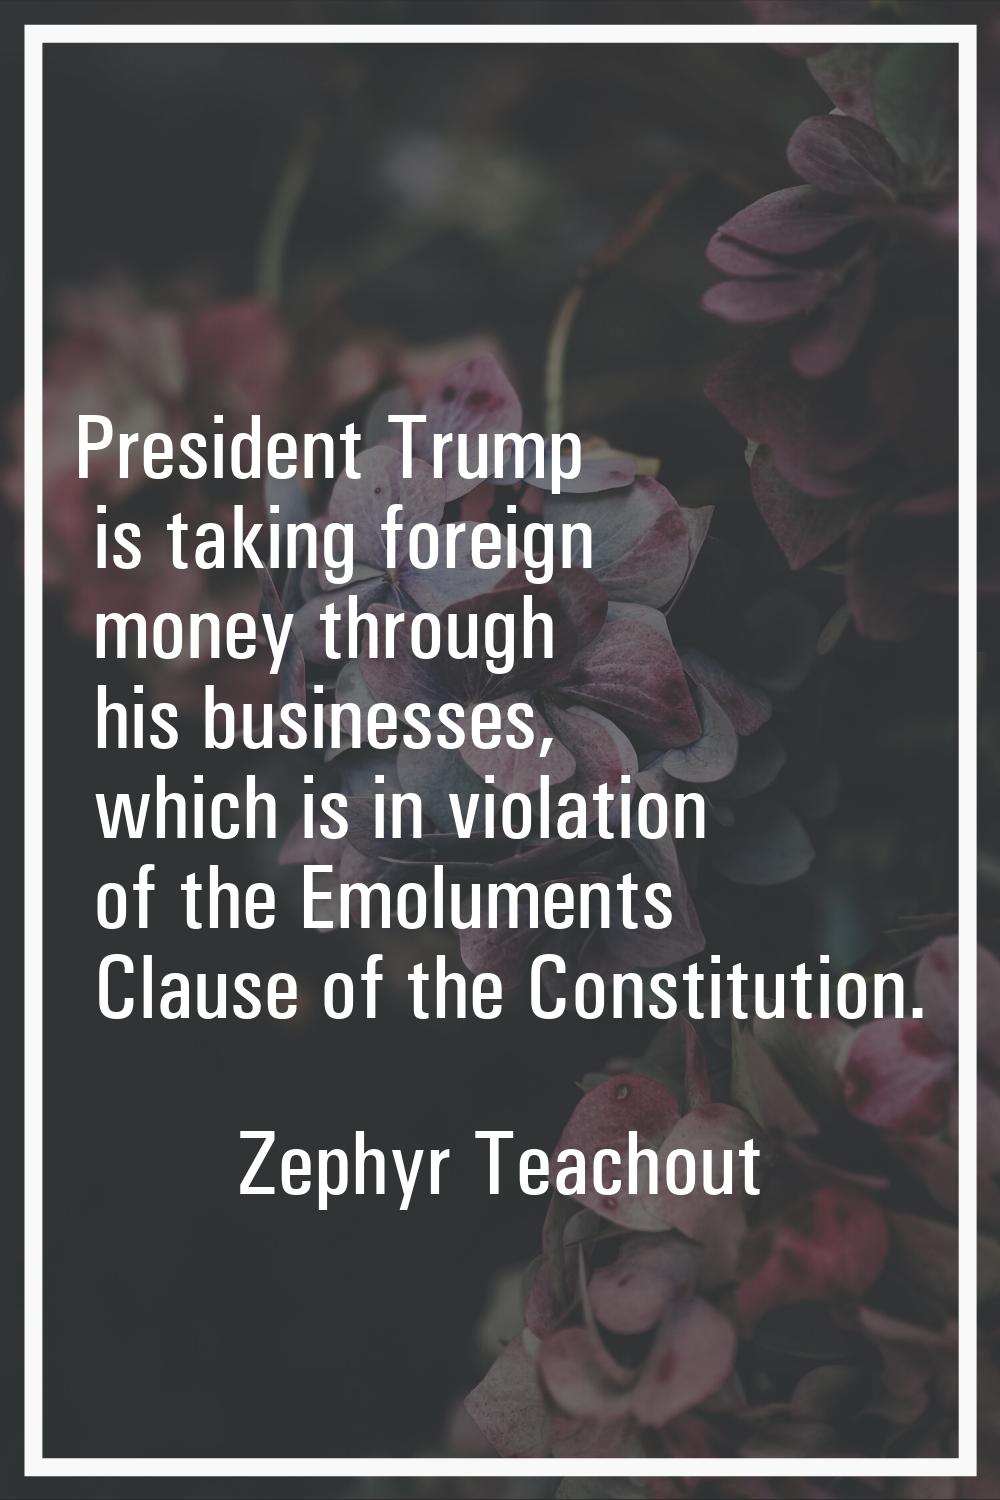 President Trump is taking foreign money through his businesses, which is in violation of the Emolum